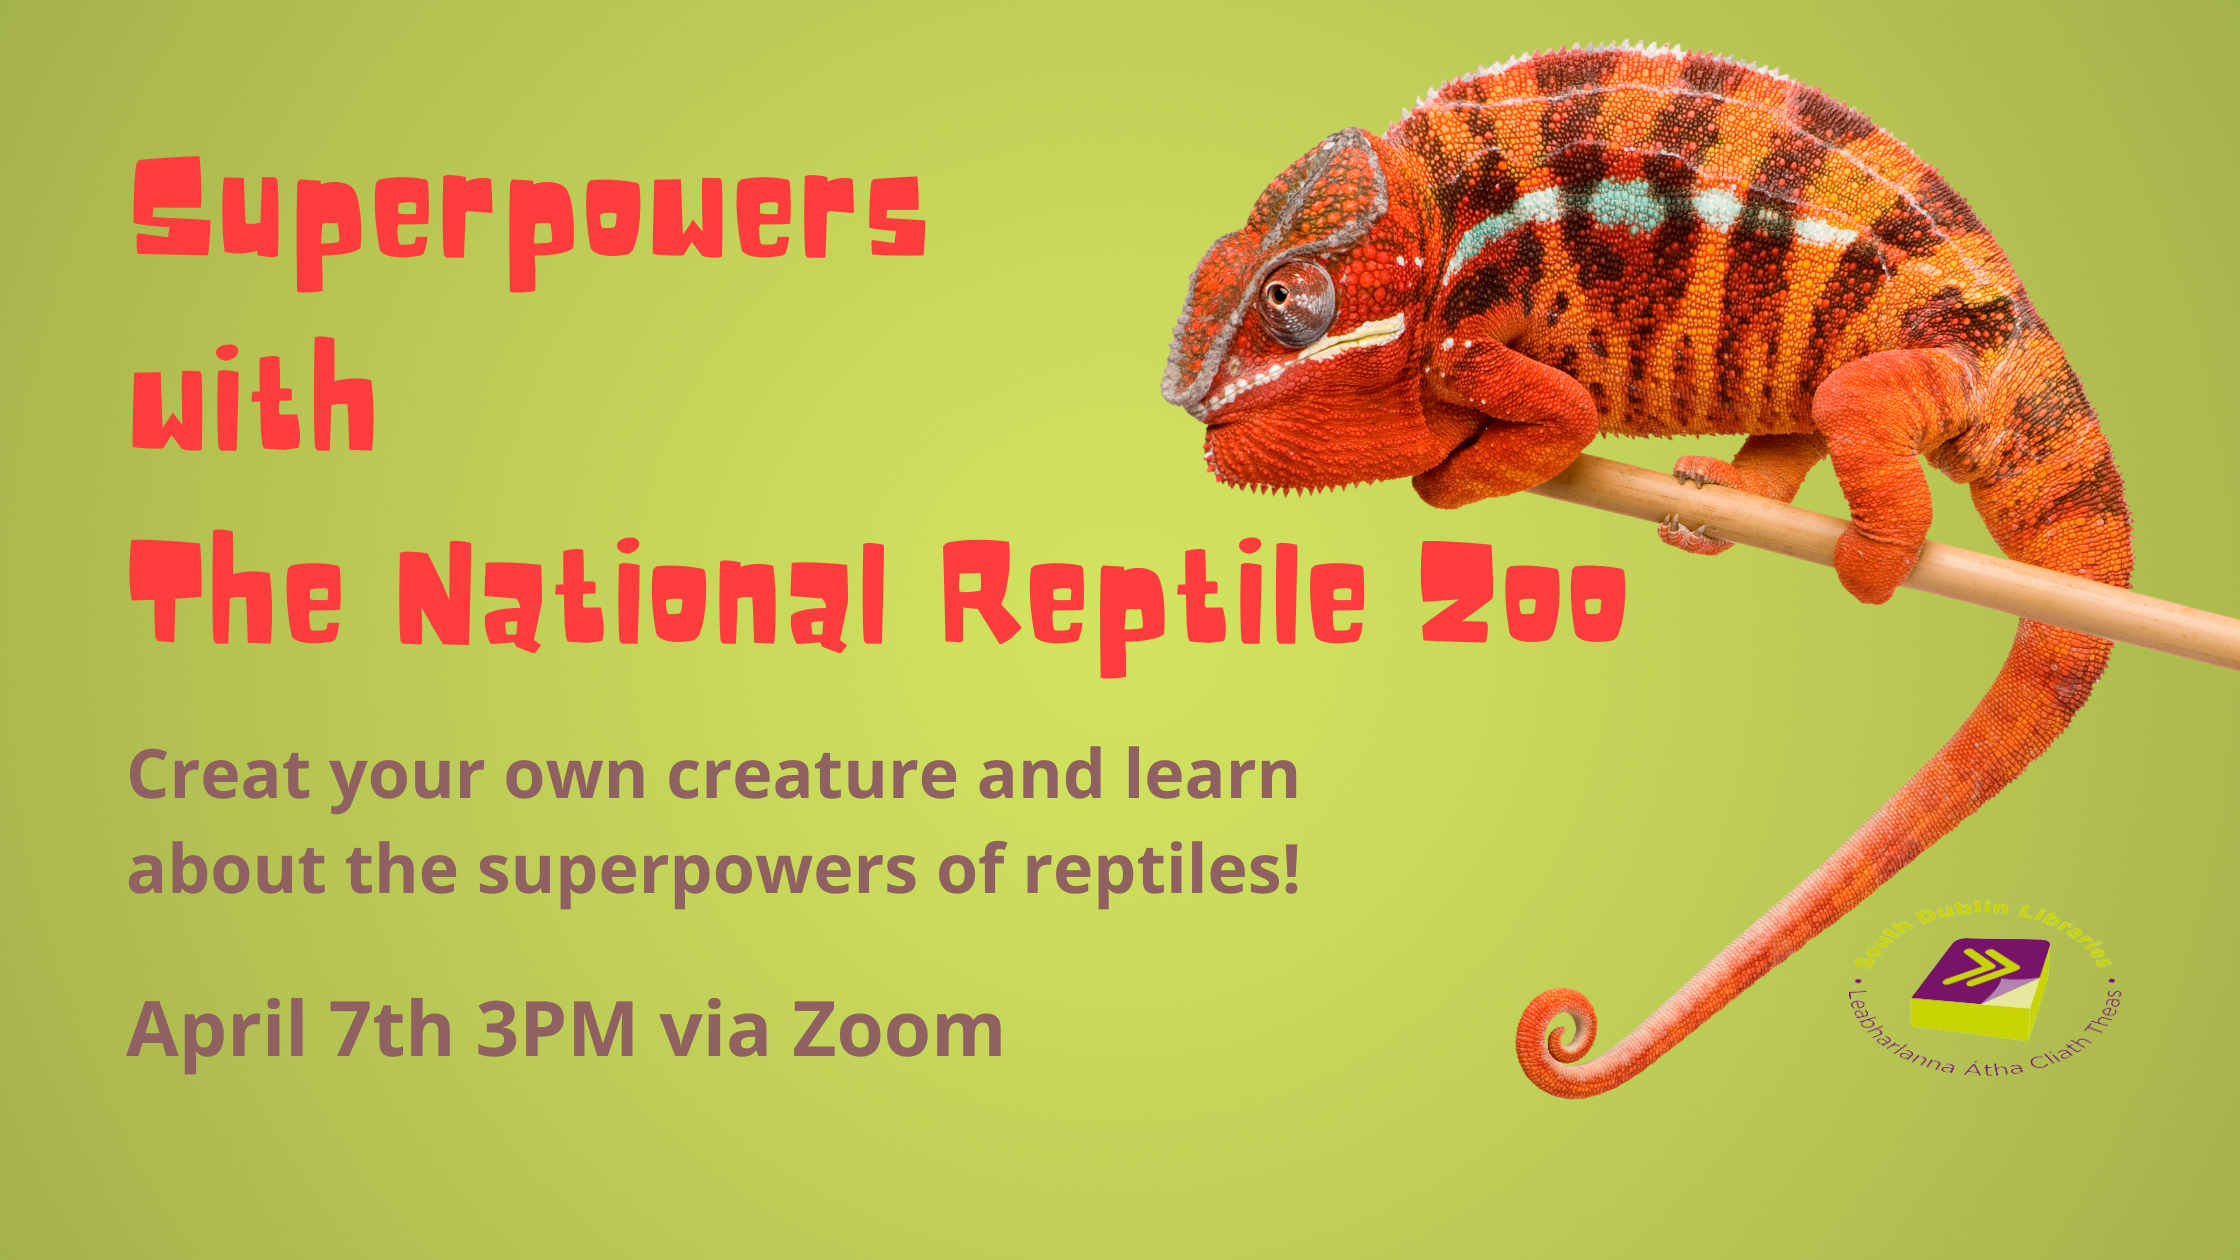 Superpowers with the National Reptile Zoo sumamry image